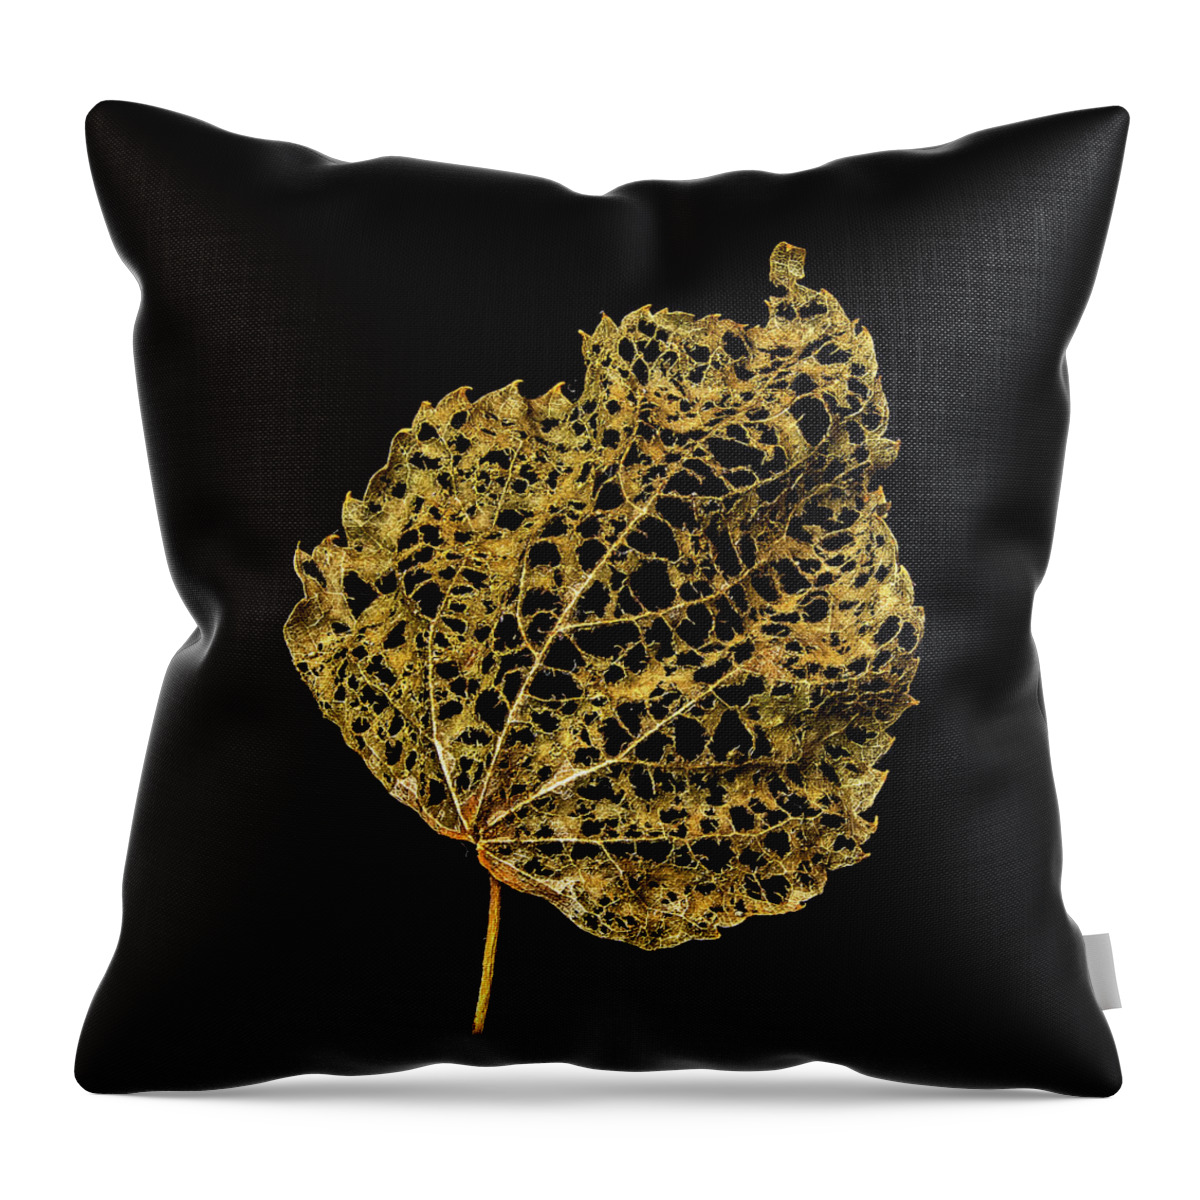 Leaf Throw Pillow featuring the photograph Linden Leaf Two by Ira Marcus